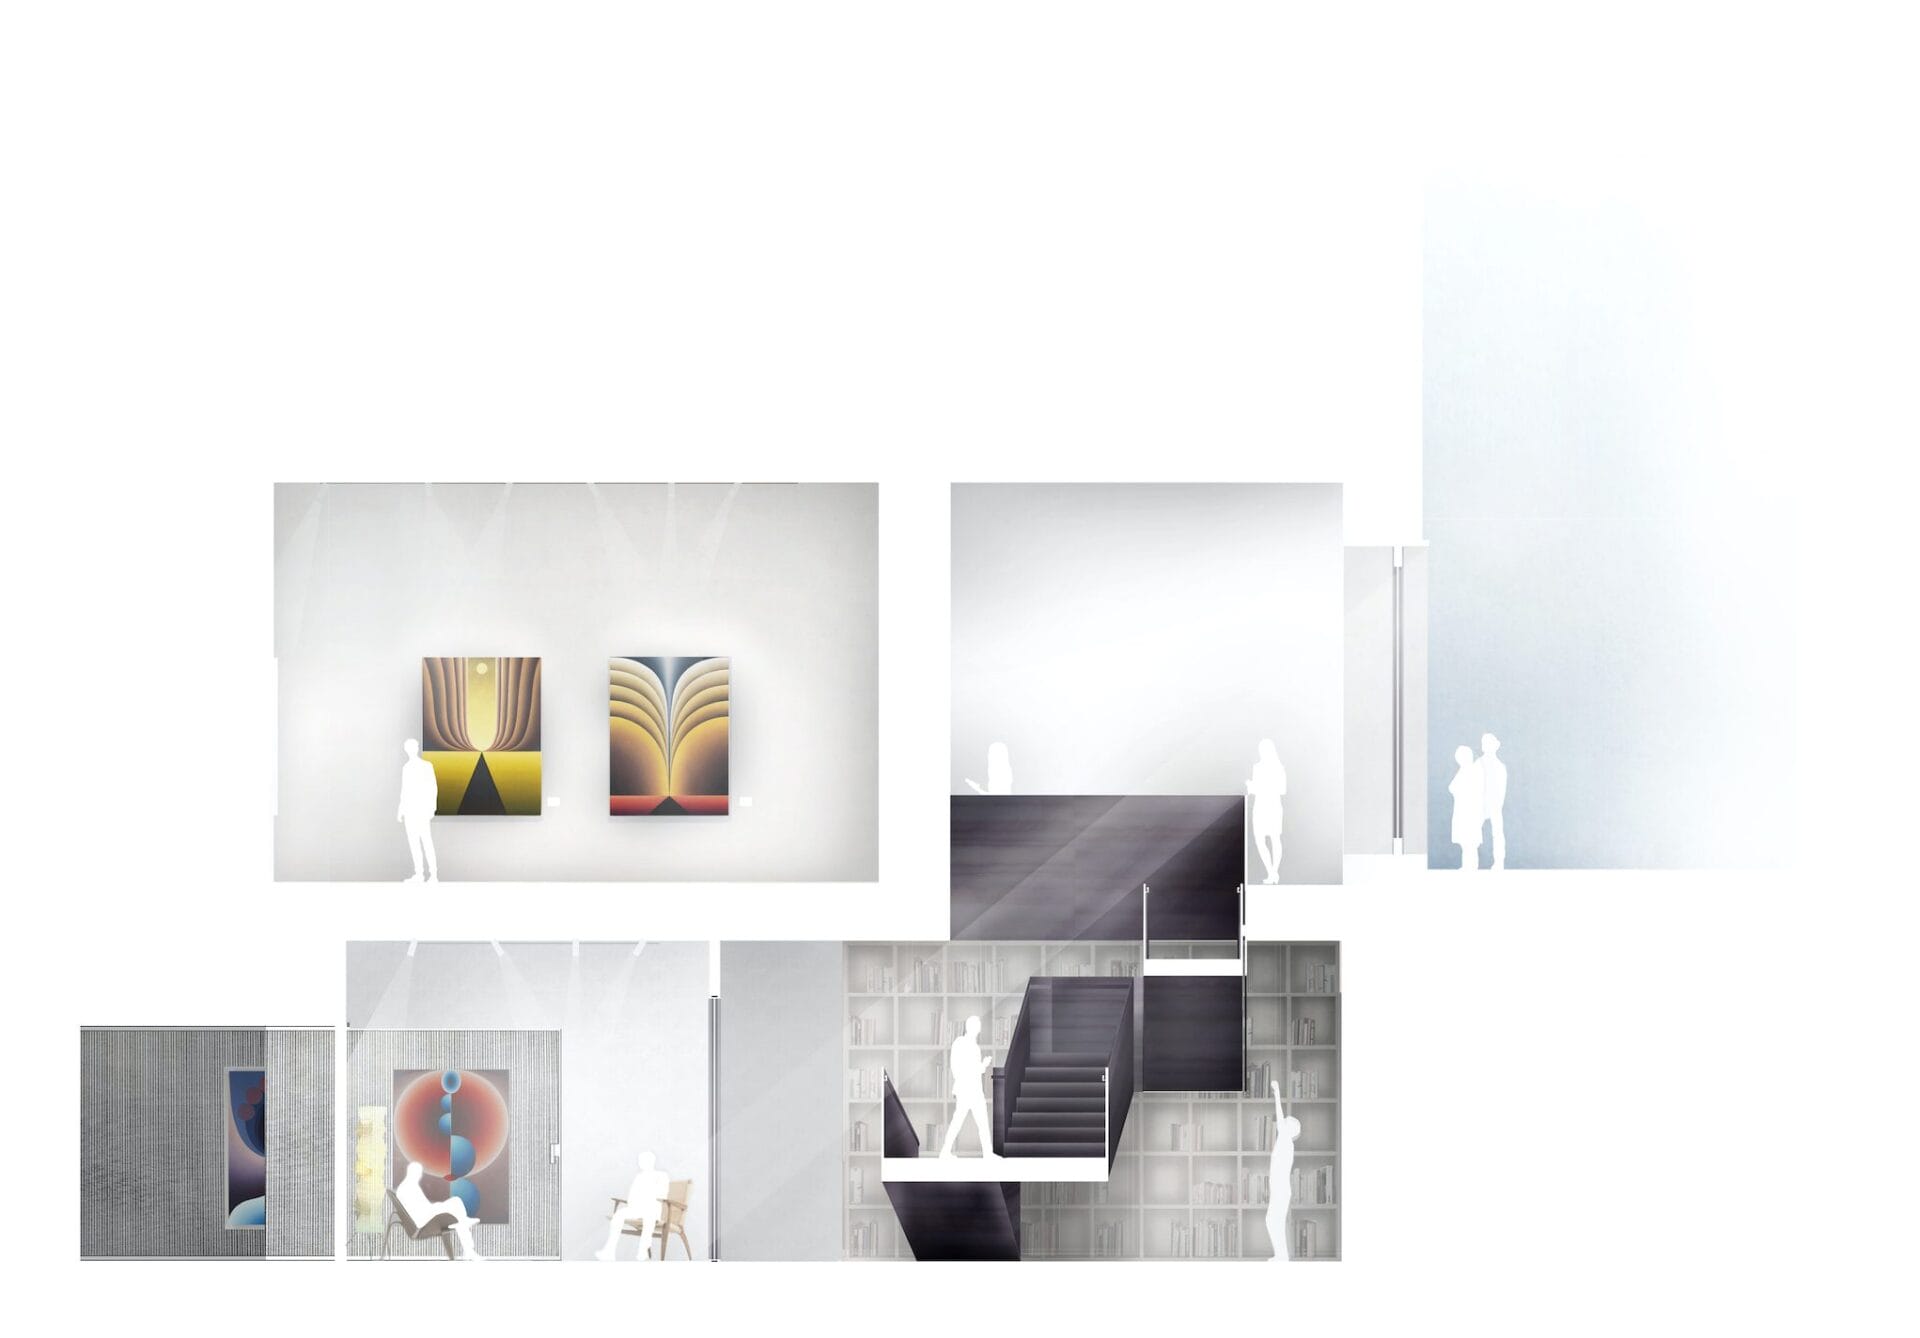 Rendering: Cross-section from Hanover Street through galleries and workspaces © Jamie Fobert Architects